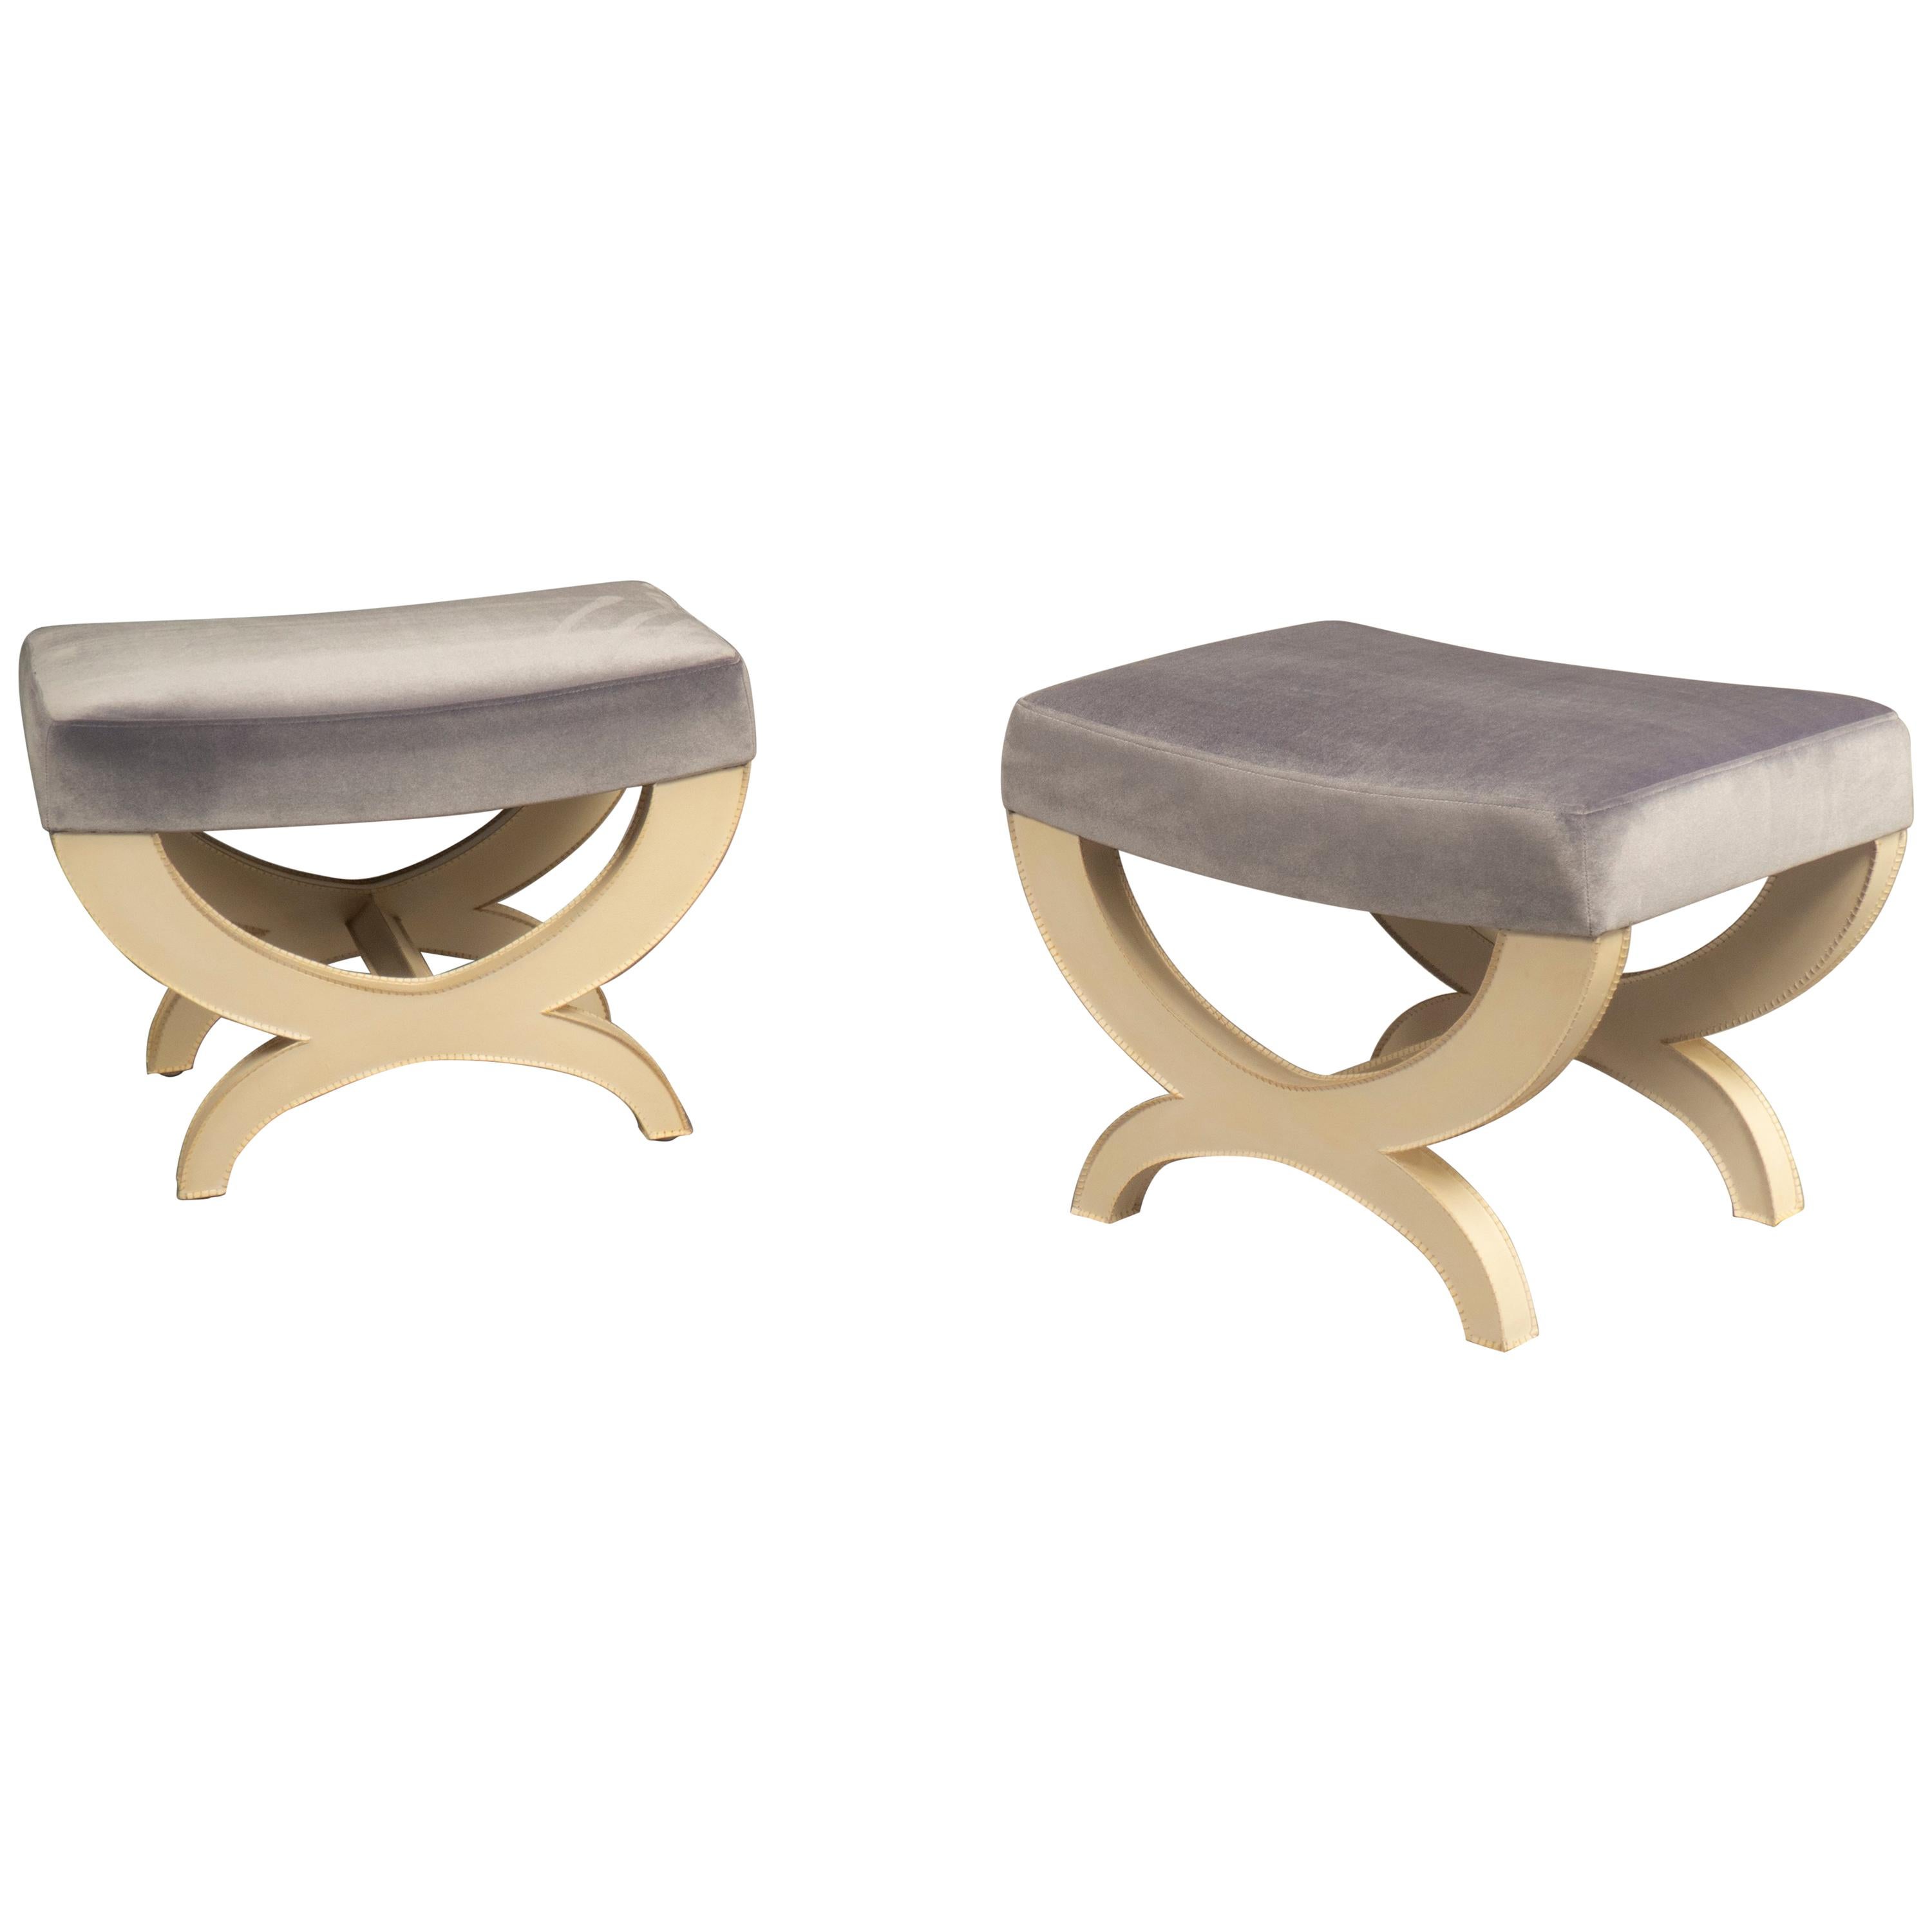 Pair of Parchment Stools, USA, 2019